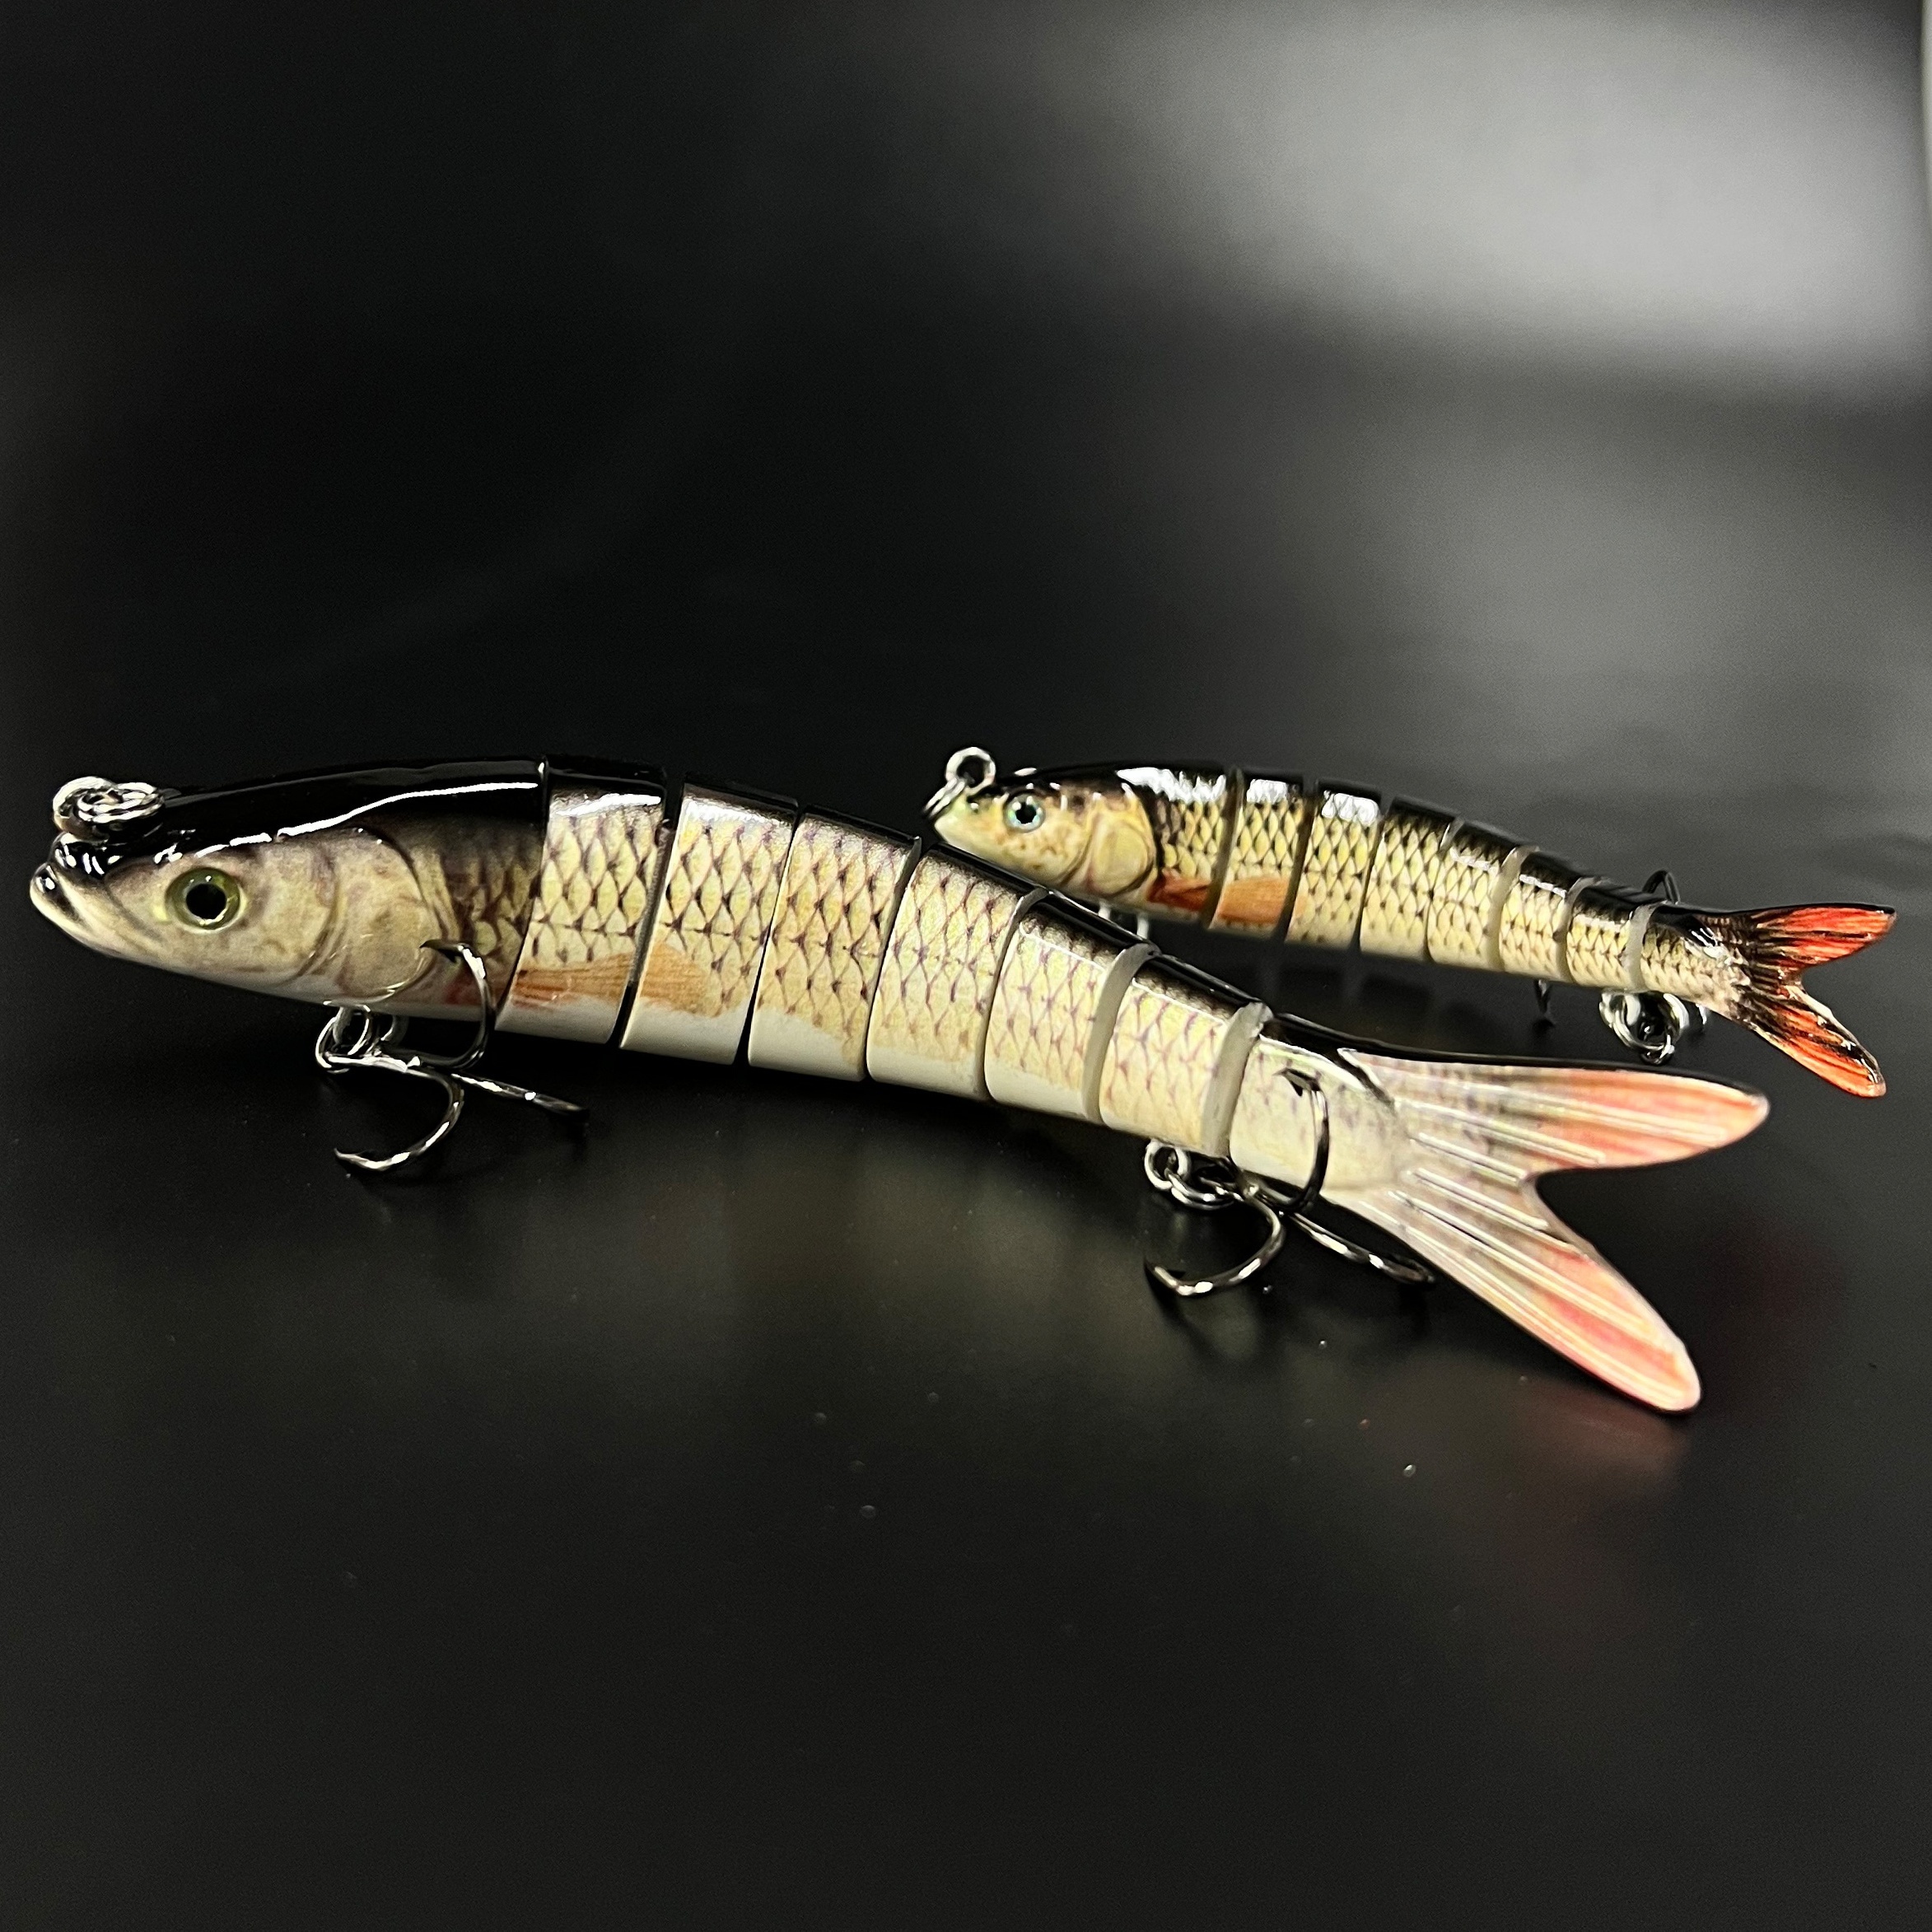 2 Pcs Fishing Lures for Bass, Trout, Walleye, Predator Fish for Freshwater  & Saltwater, Lifelike 3D Eyes Fishing Baits Attractants, Fishing Gear and